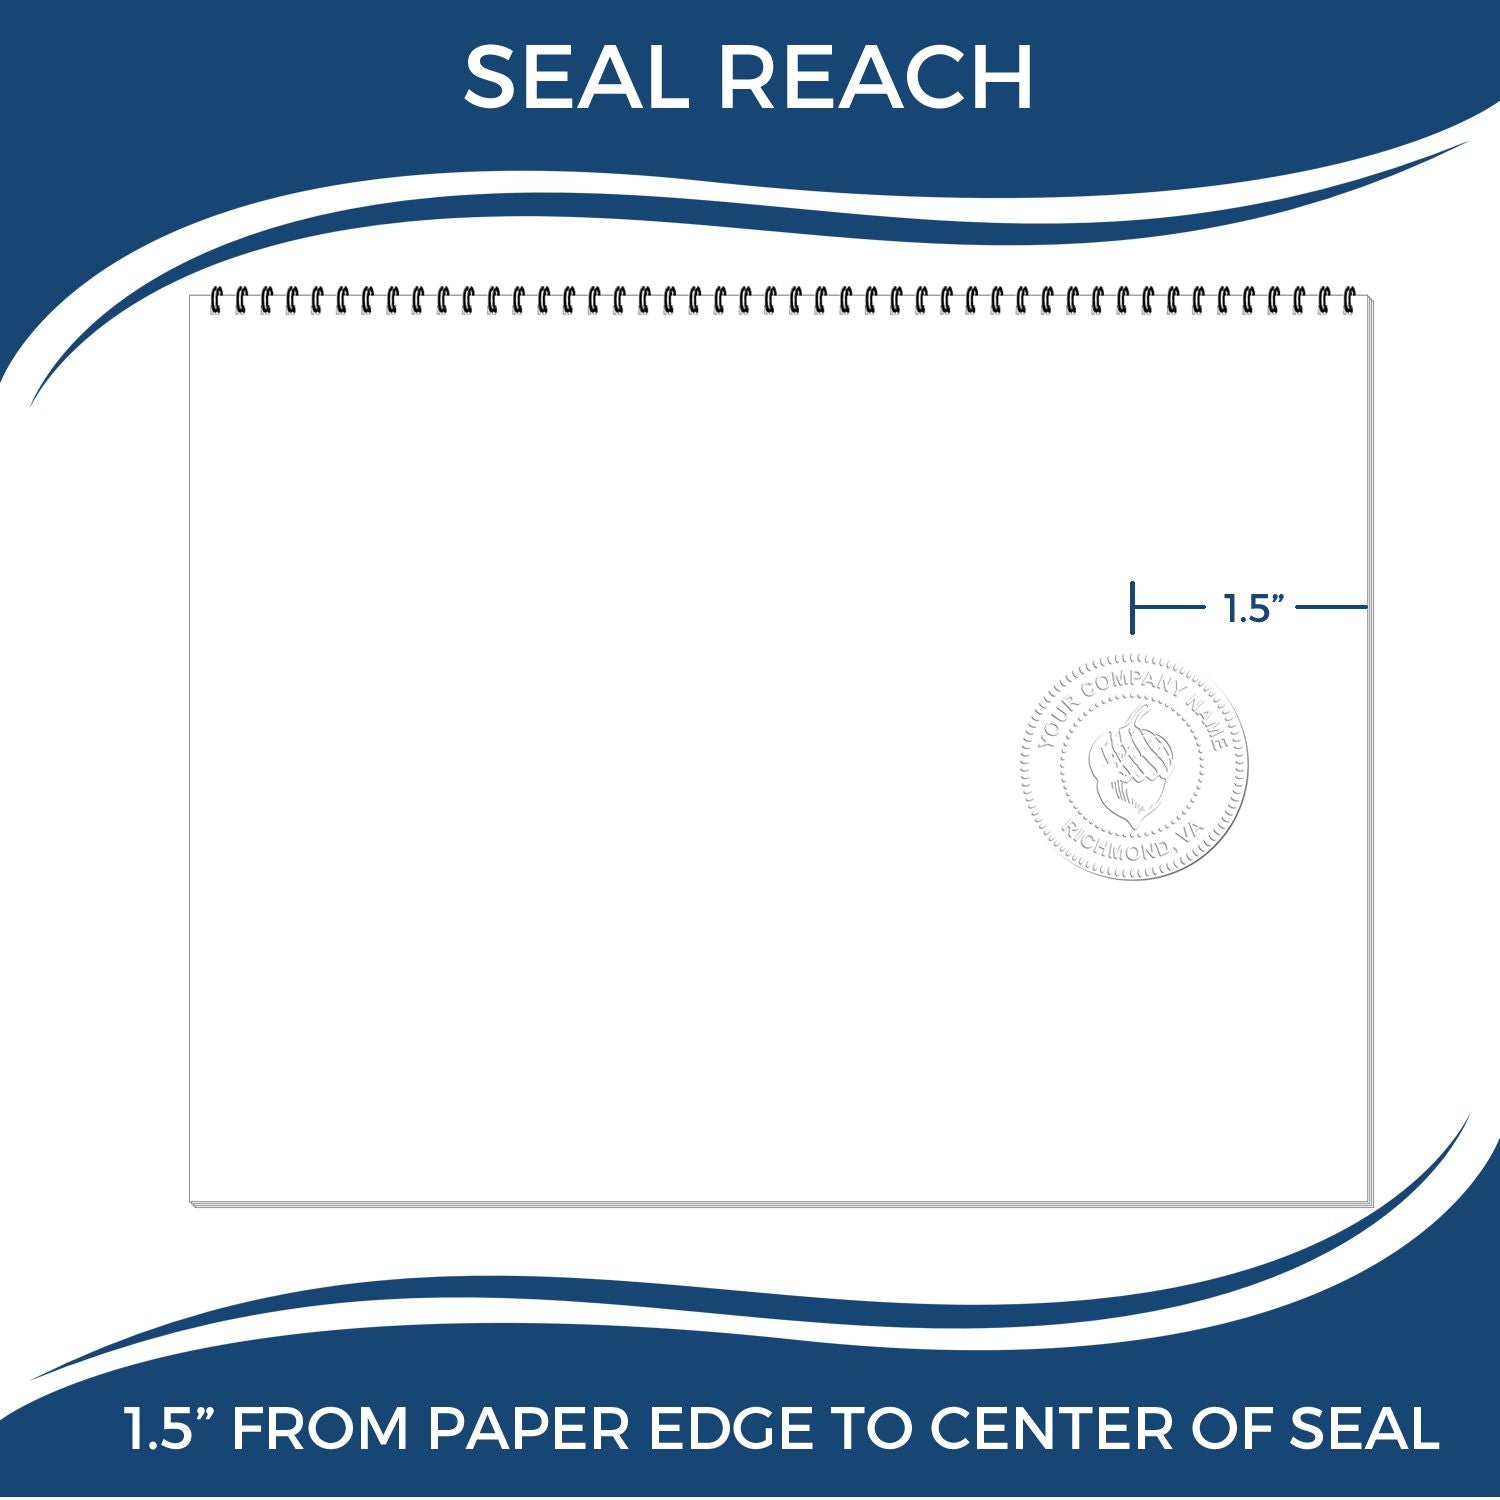 An infographic showing the seal reach which is represented by a ruler and a miniature seal image of the State of Tennessee Handheld Landscape Architect Seal